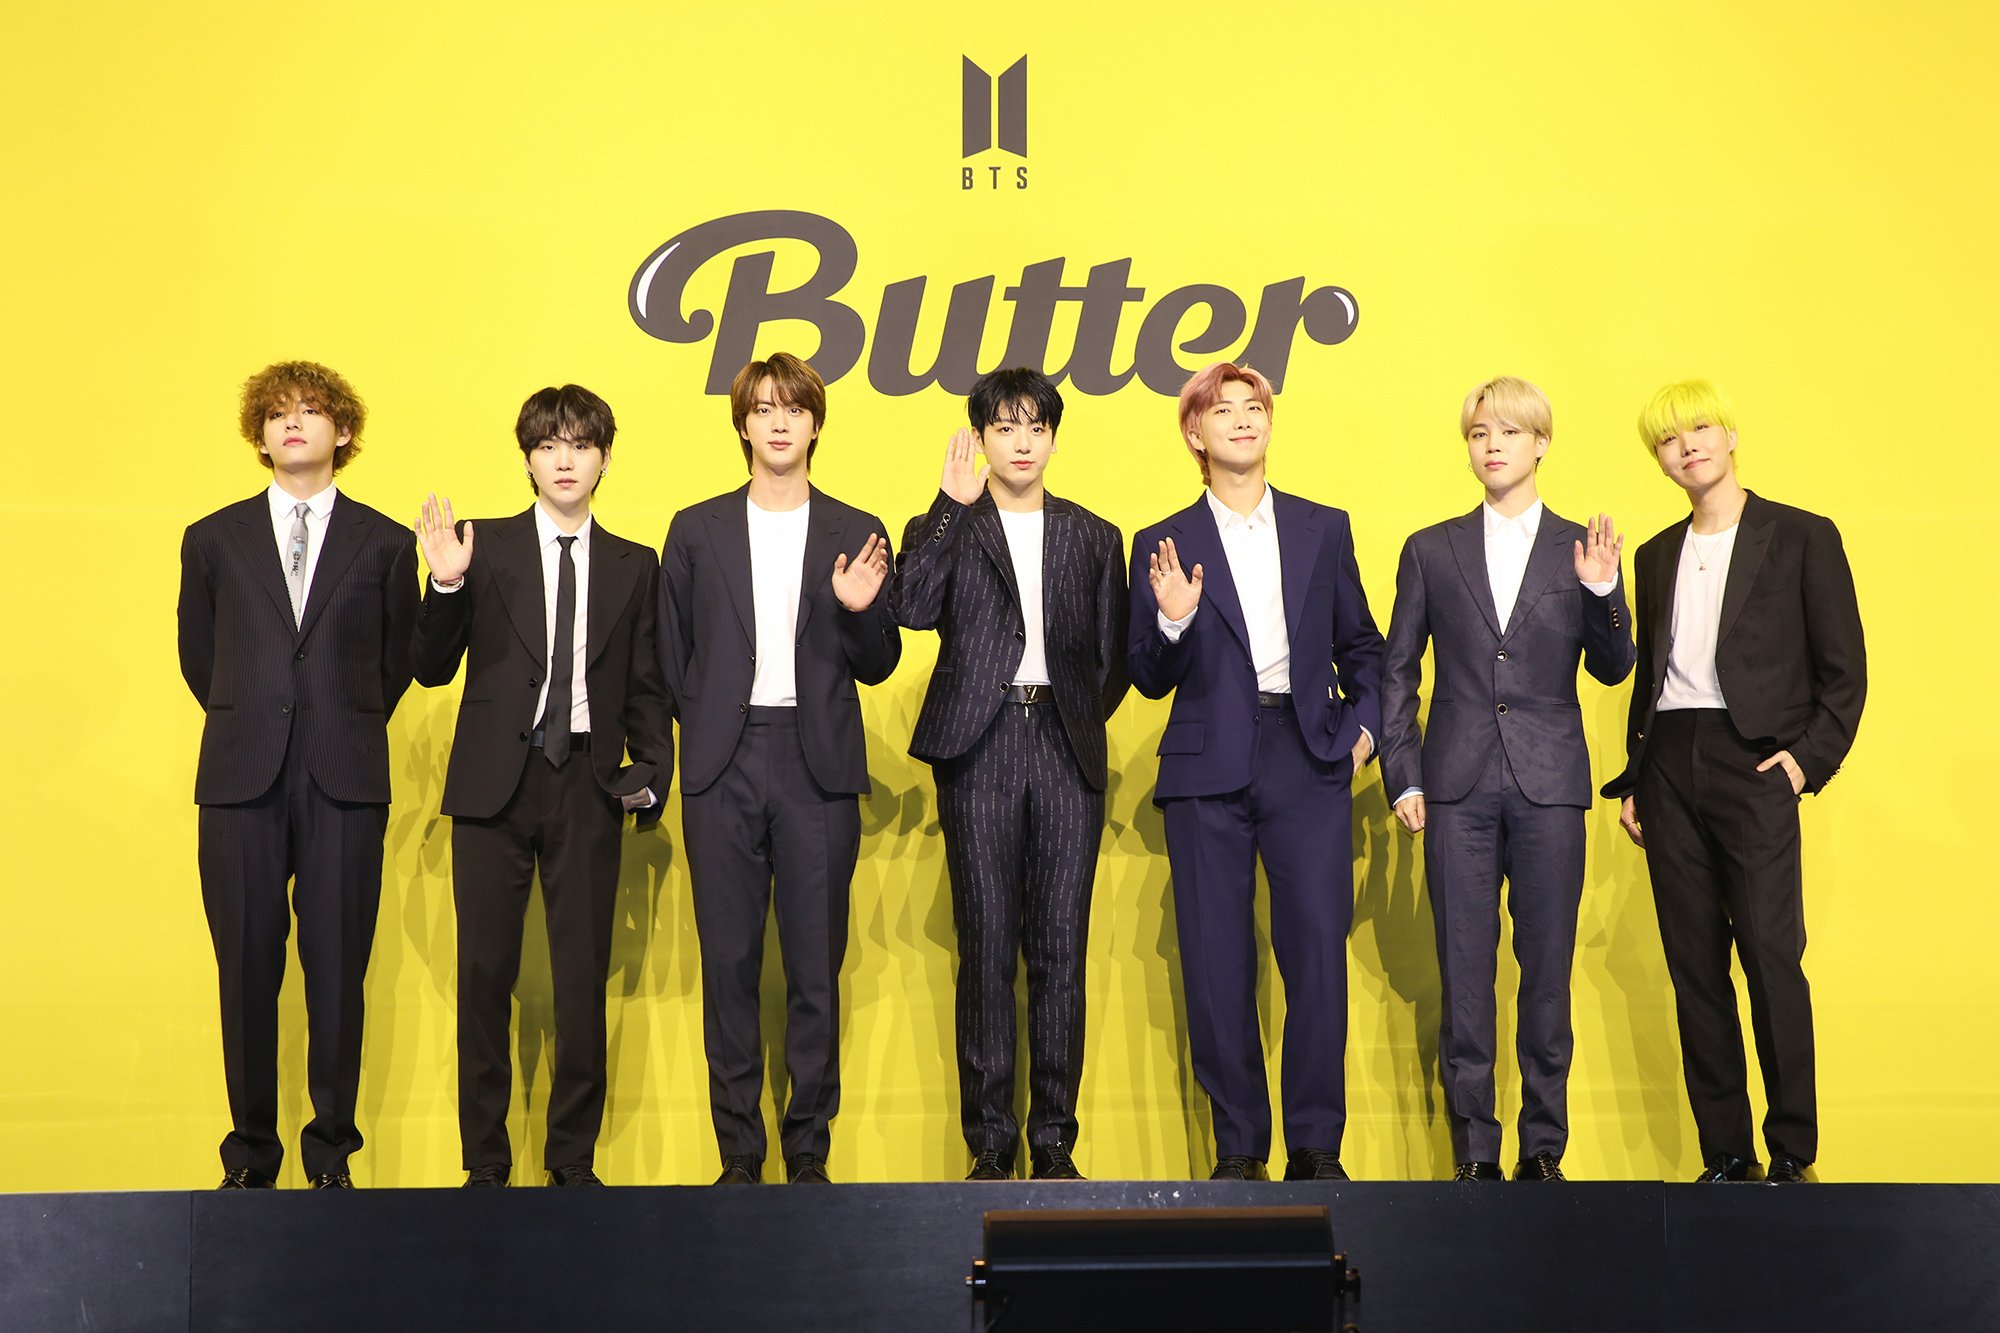 V, Suga, Jin, Jungkook, RM, Jimin, and J-Hope of BTS pose in front of a yellow backdrop at the band's press conference for their song 'Butter'